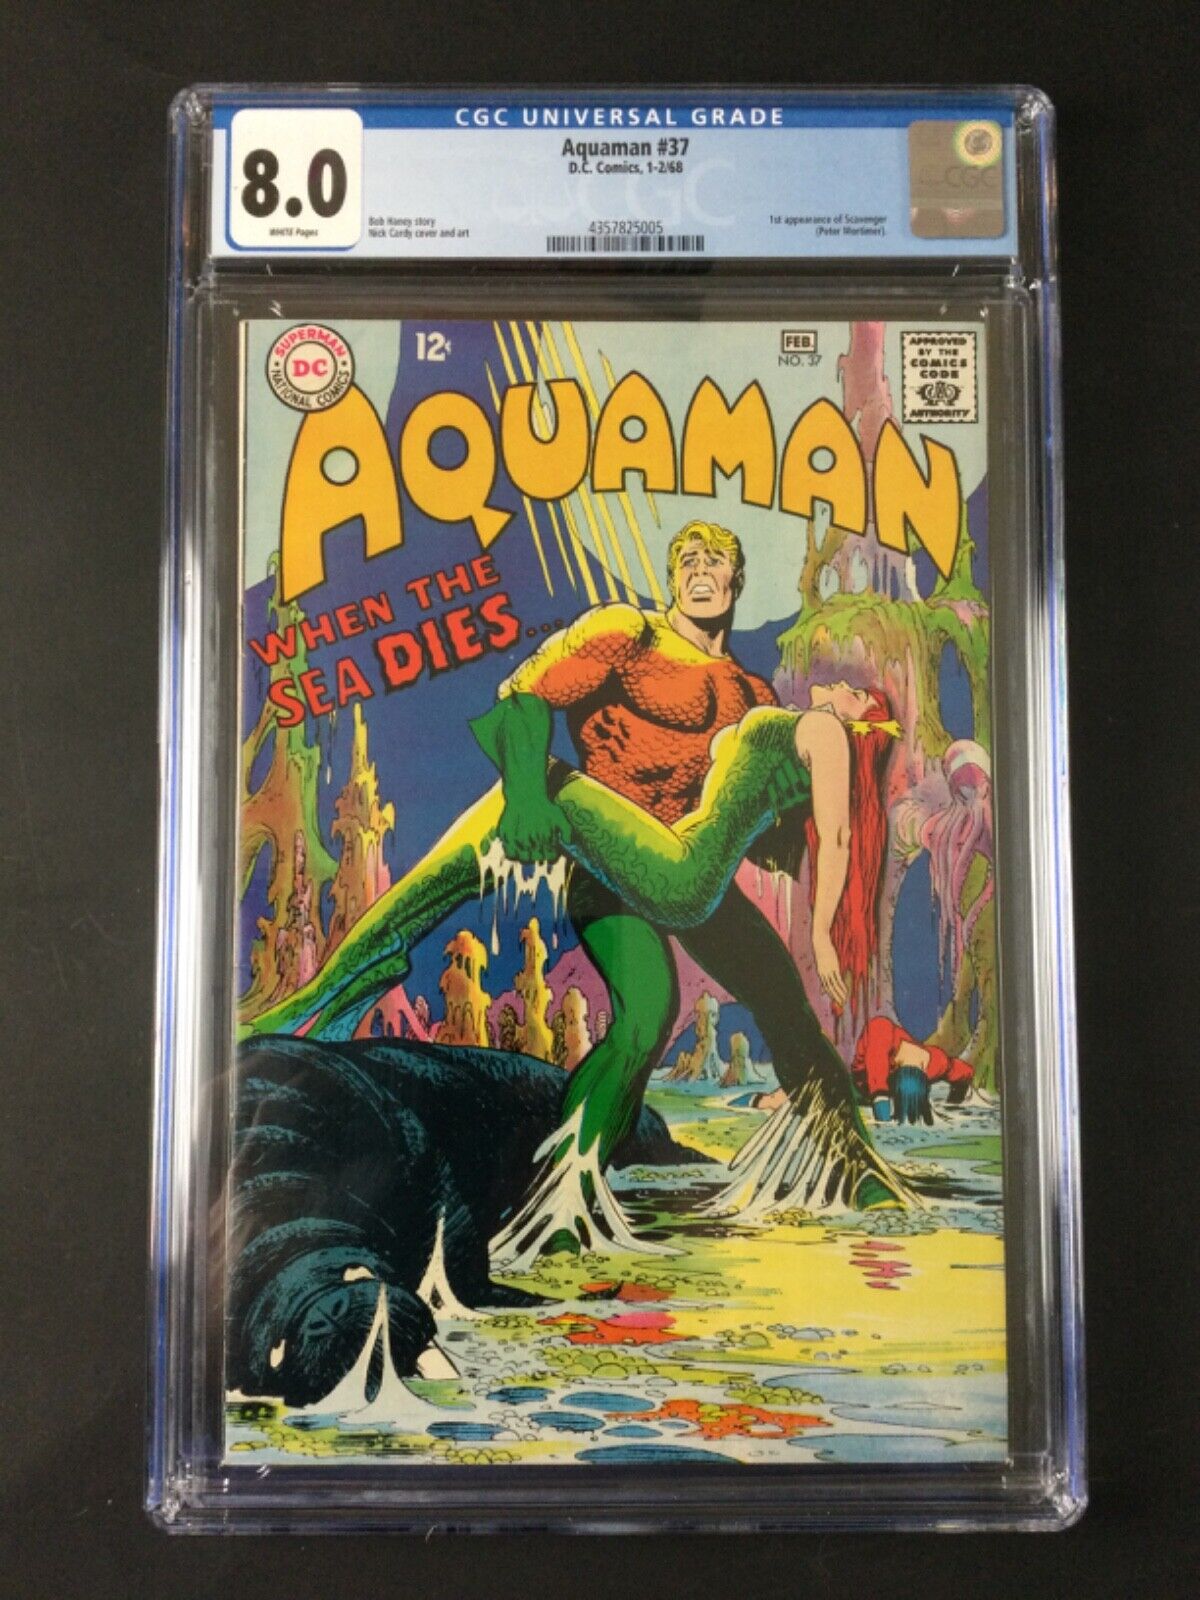 Aquaman #37 (1962): NEW CGC 8.0 1st Appearance of Scavenger Silver Age DC